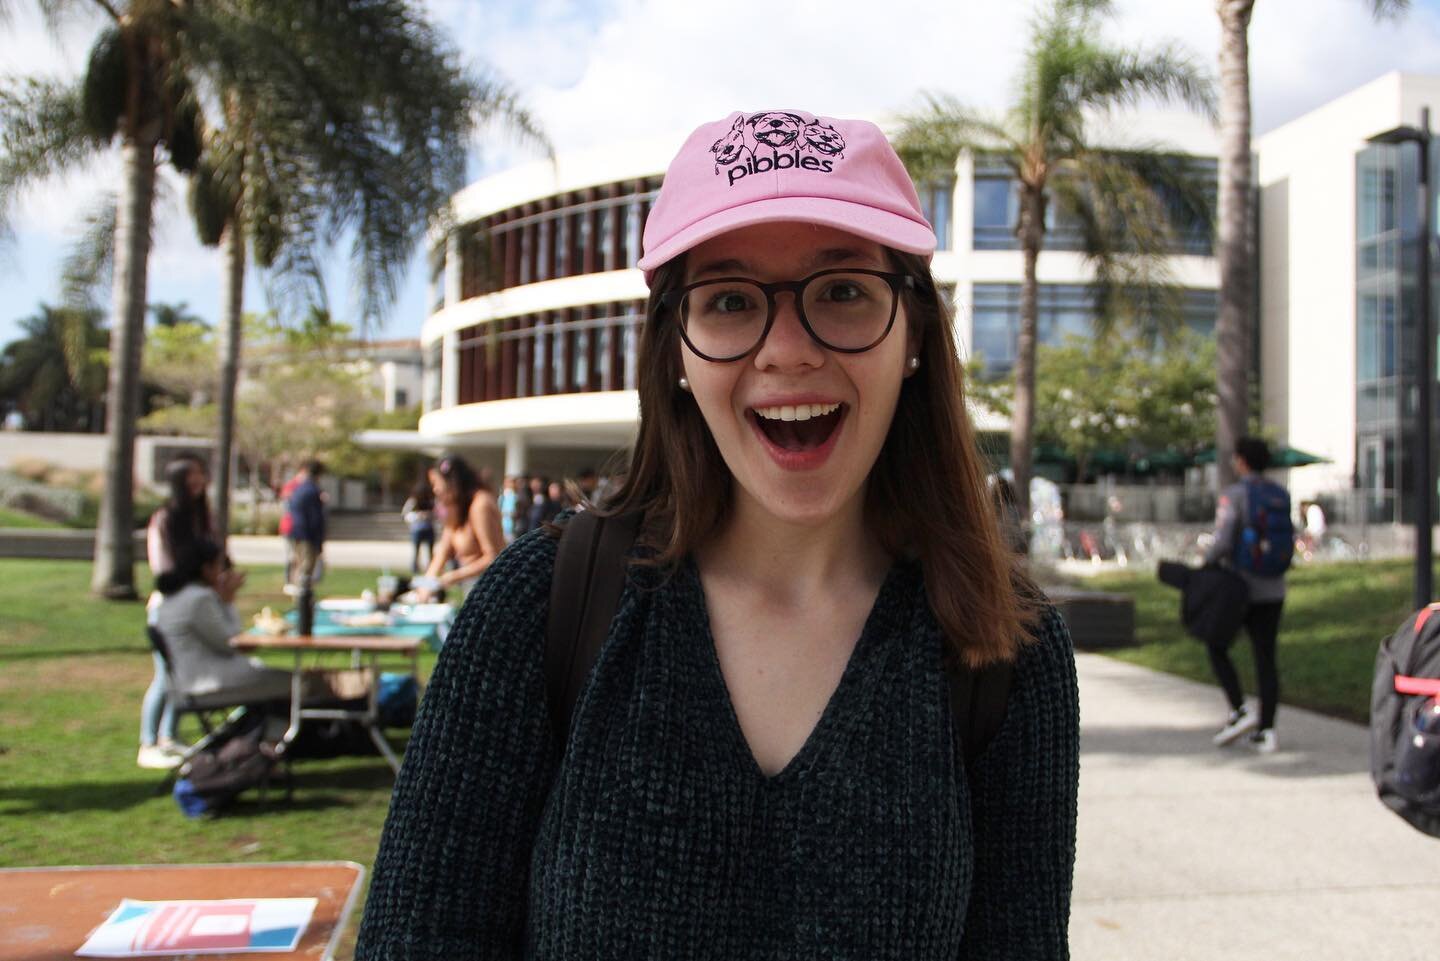 Thank you to everyone who visited our table at Palm Walk today! Whether you bought a hat, donated, or just stopped by to learn about our cause, Pibbles thanks you! 🥰 Keep an eye out for when and where we will be selling again 💕
&bull;
#pitbulls #pi